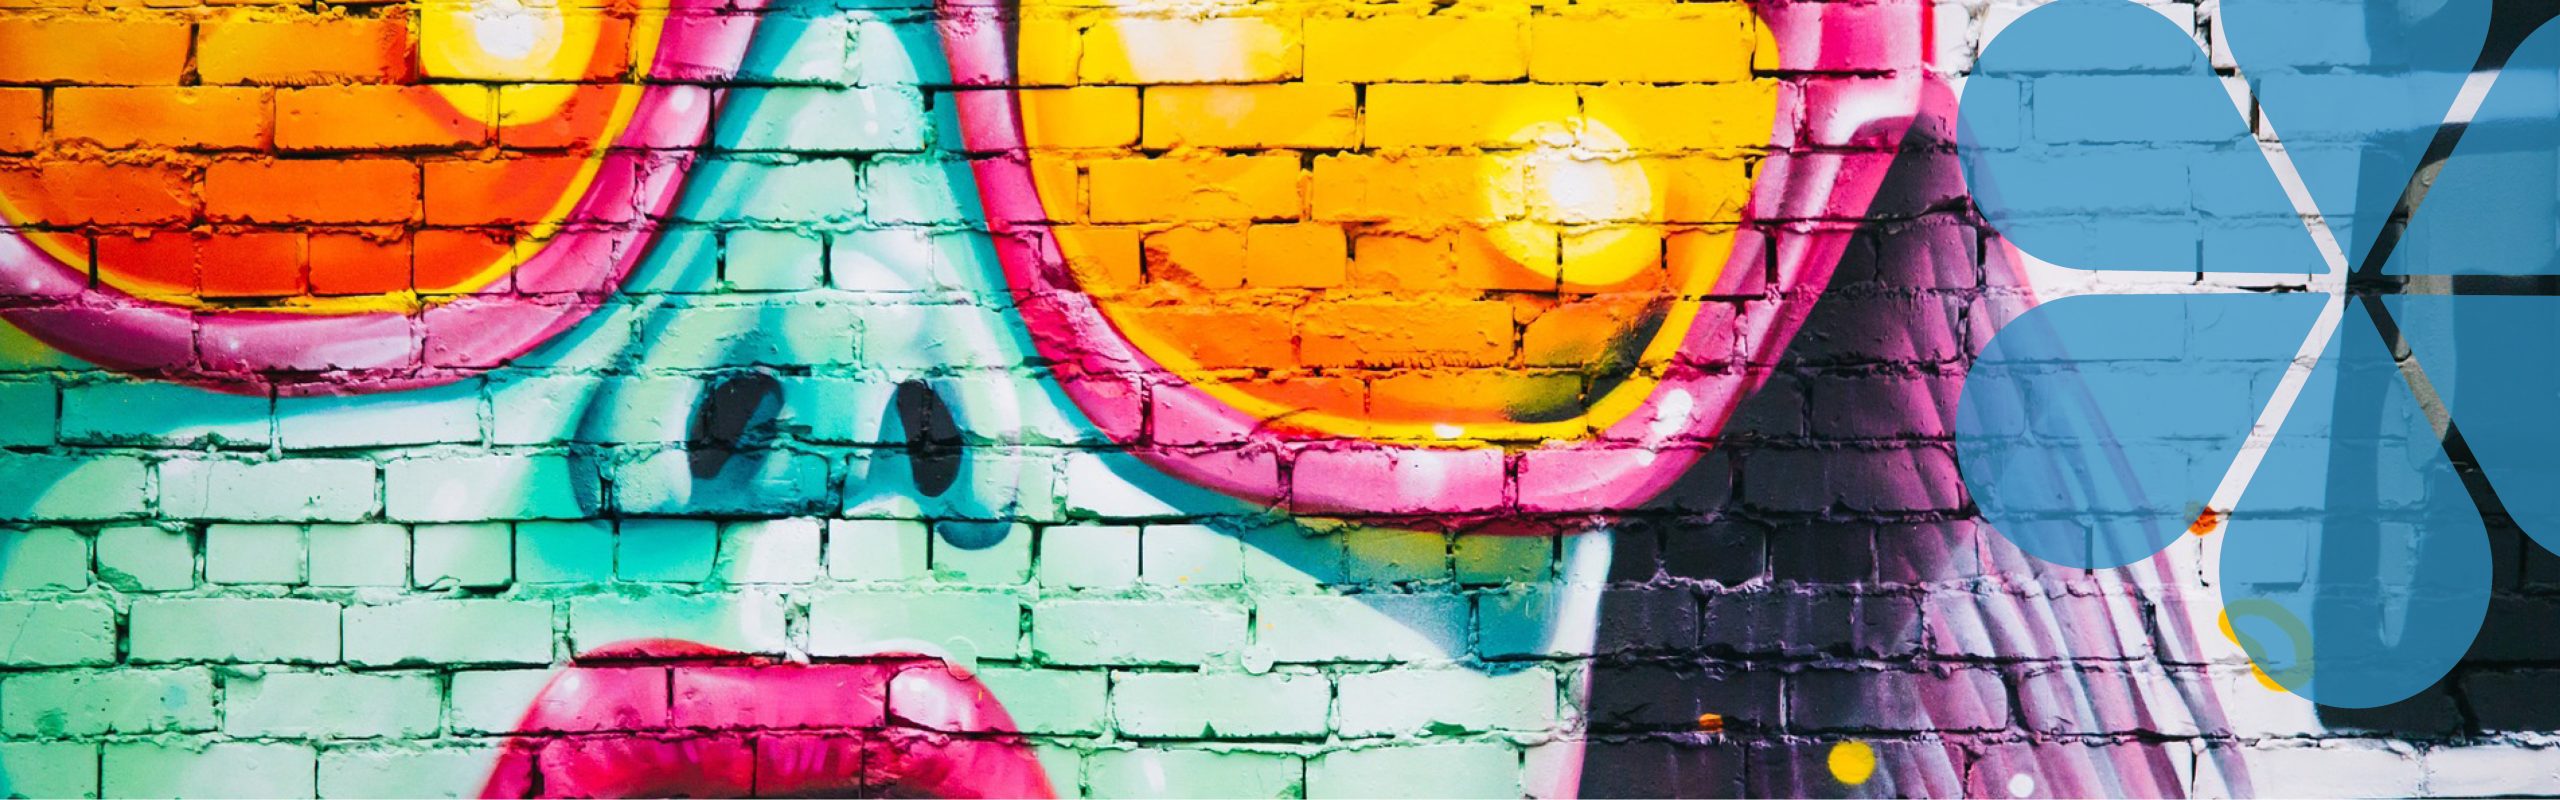 A photo of a wall which has been spray painted. The artwork is of a woman with big red lips and wearing sunglasses.